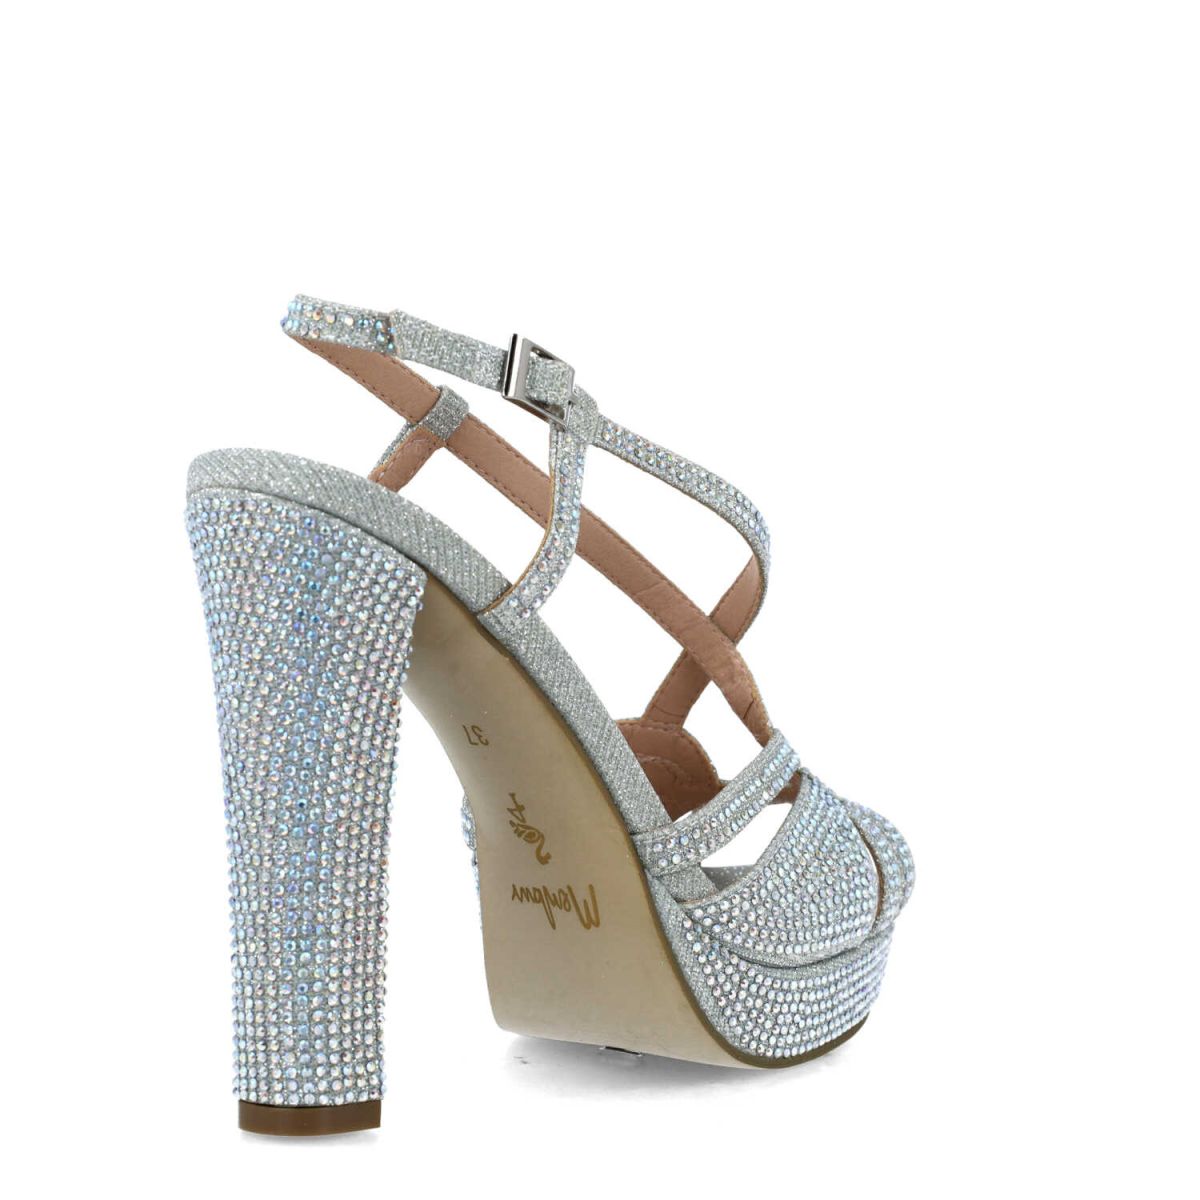 High Heel Silver Sandals with Shimmering Diamante Detailing